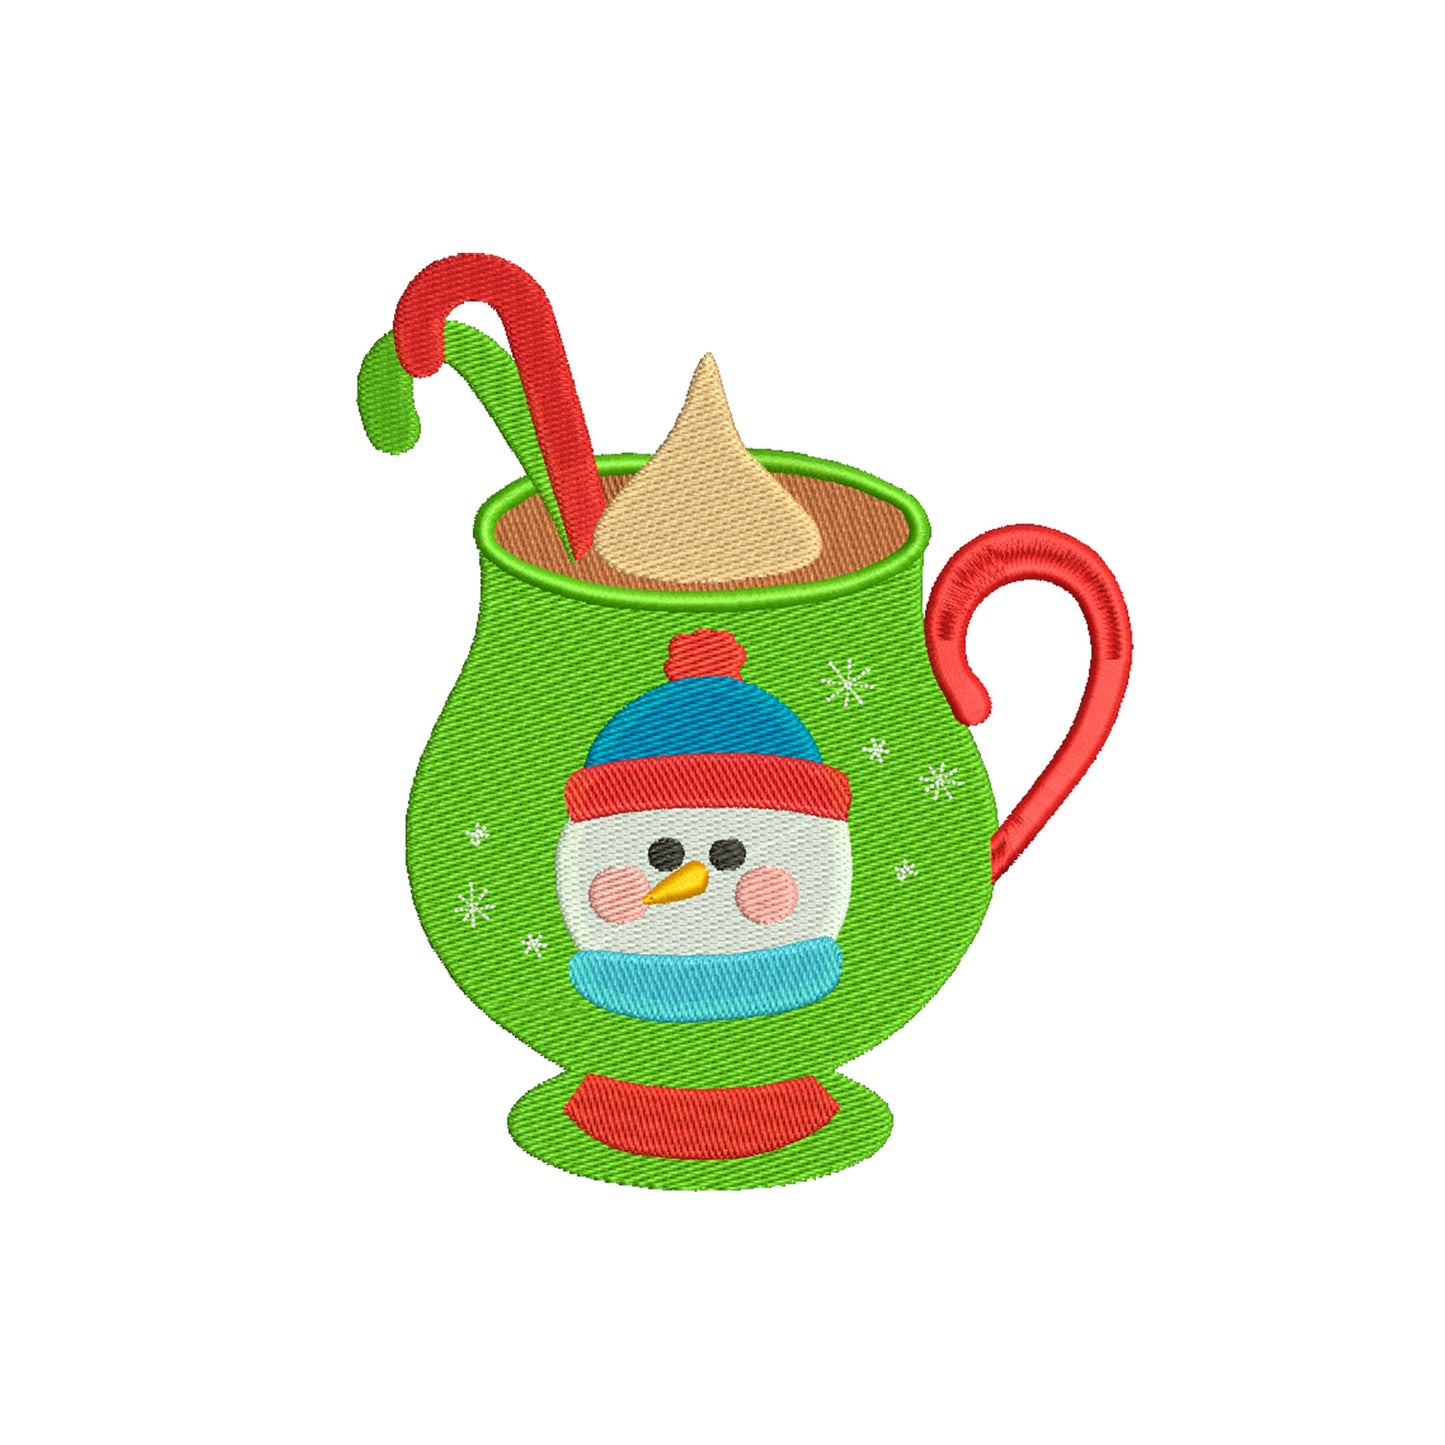 Hot chocolate embroidery christmas designs - 910151